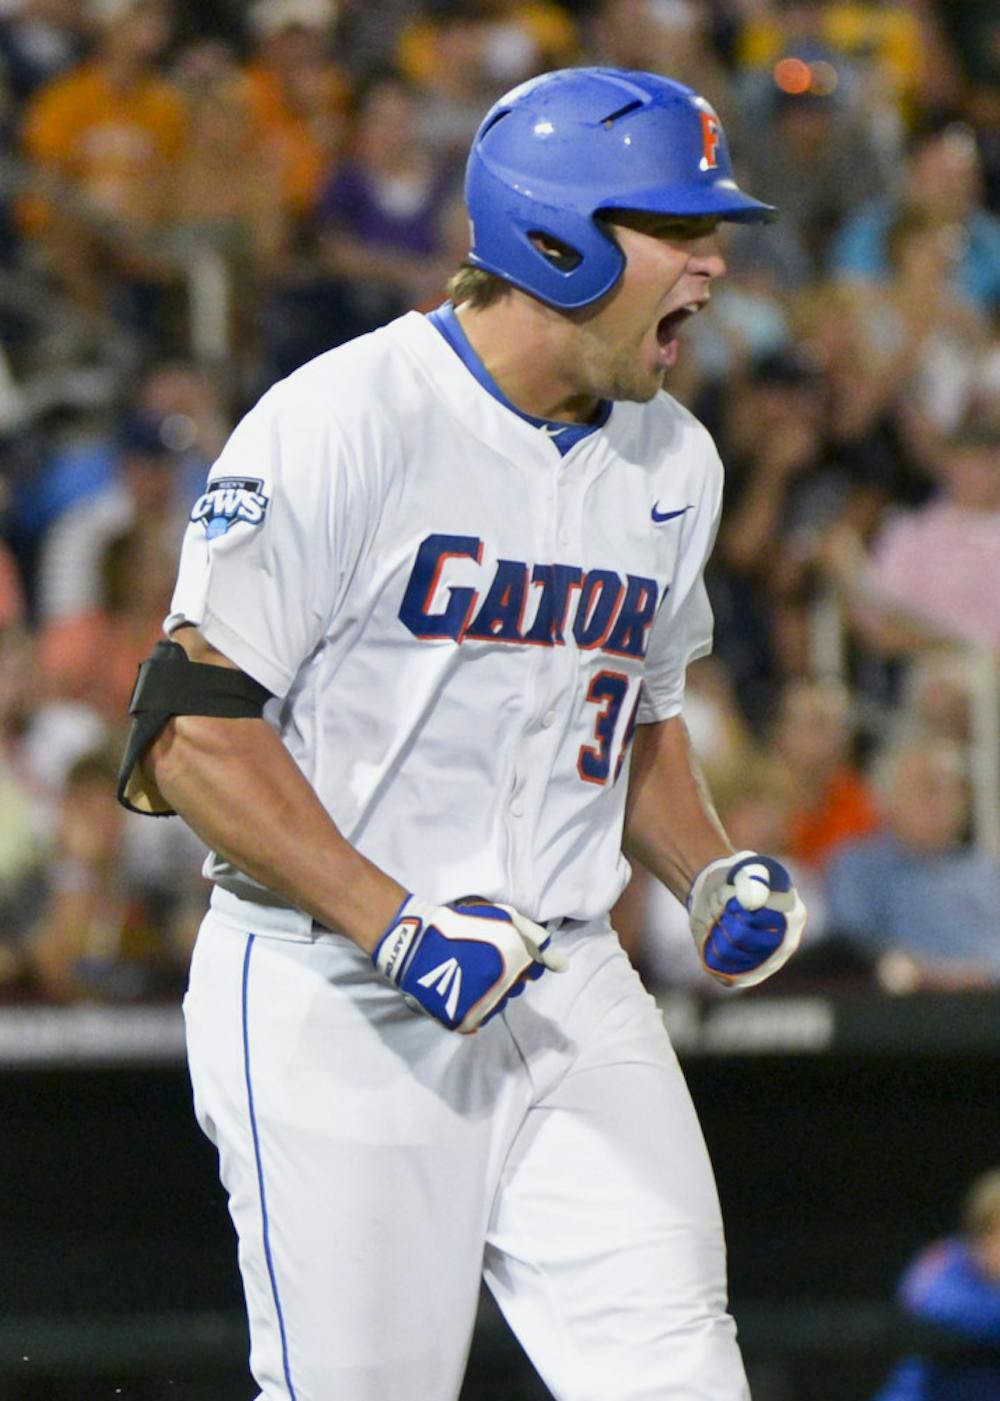 <p>Florida's Brian Johnson yells after lining out to South Carolina right fielder Adam Matthews in the seventh inning of an NCAA College World Series baseball game in Omaha, Neb., Saturday, June 16, 2012.</p>